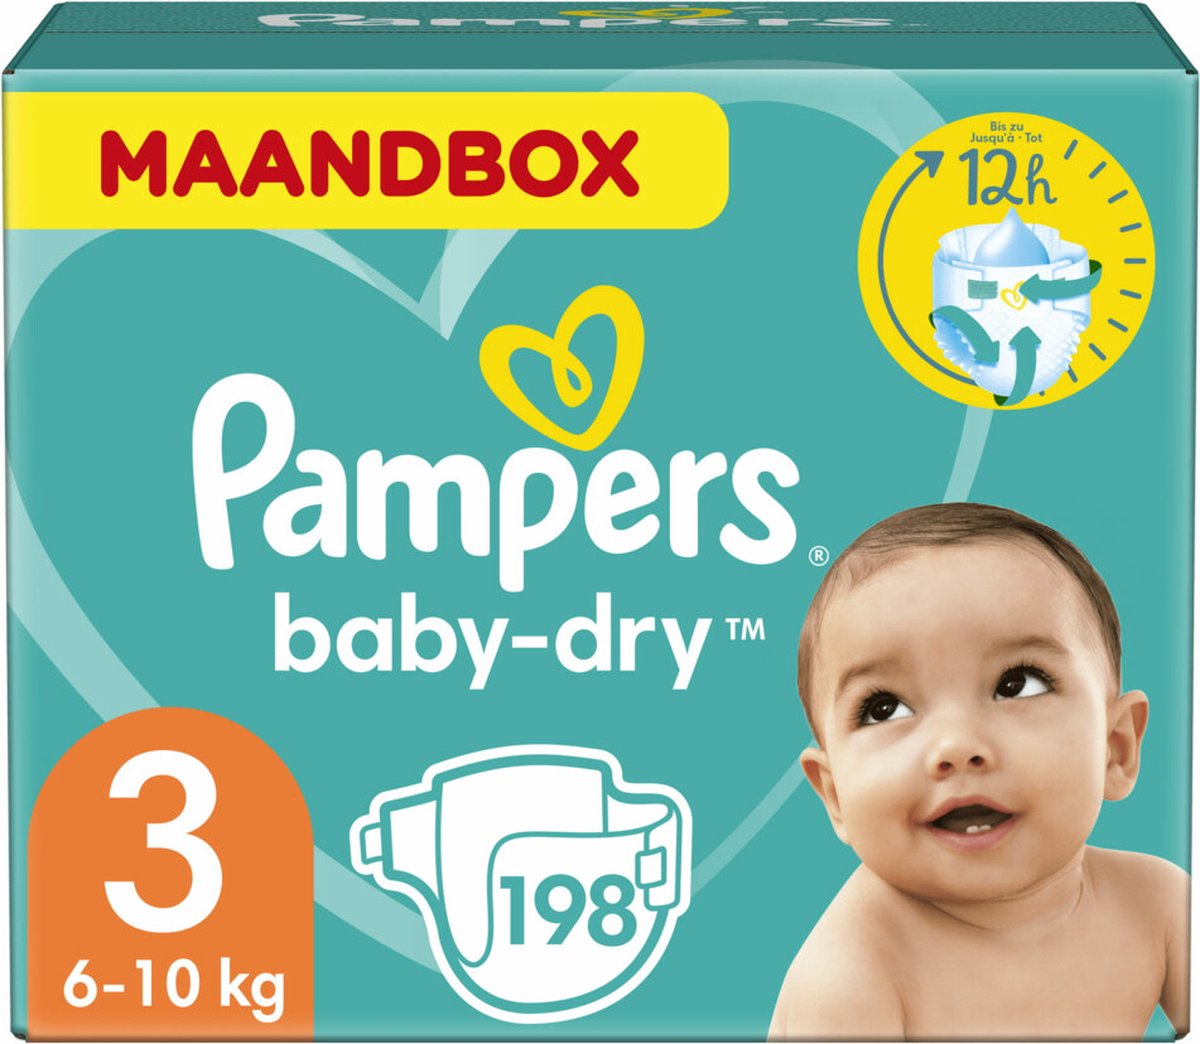 Pampers Baby-Dry Taille 3 x198 Langes - Pack 1 Mois | bol.com